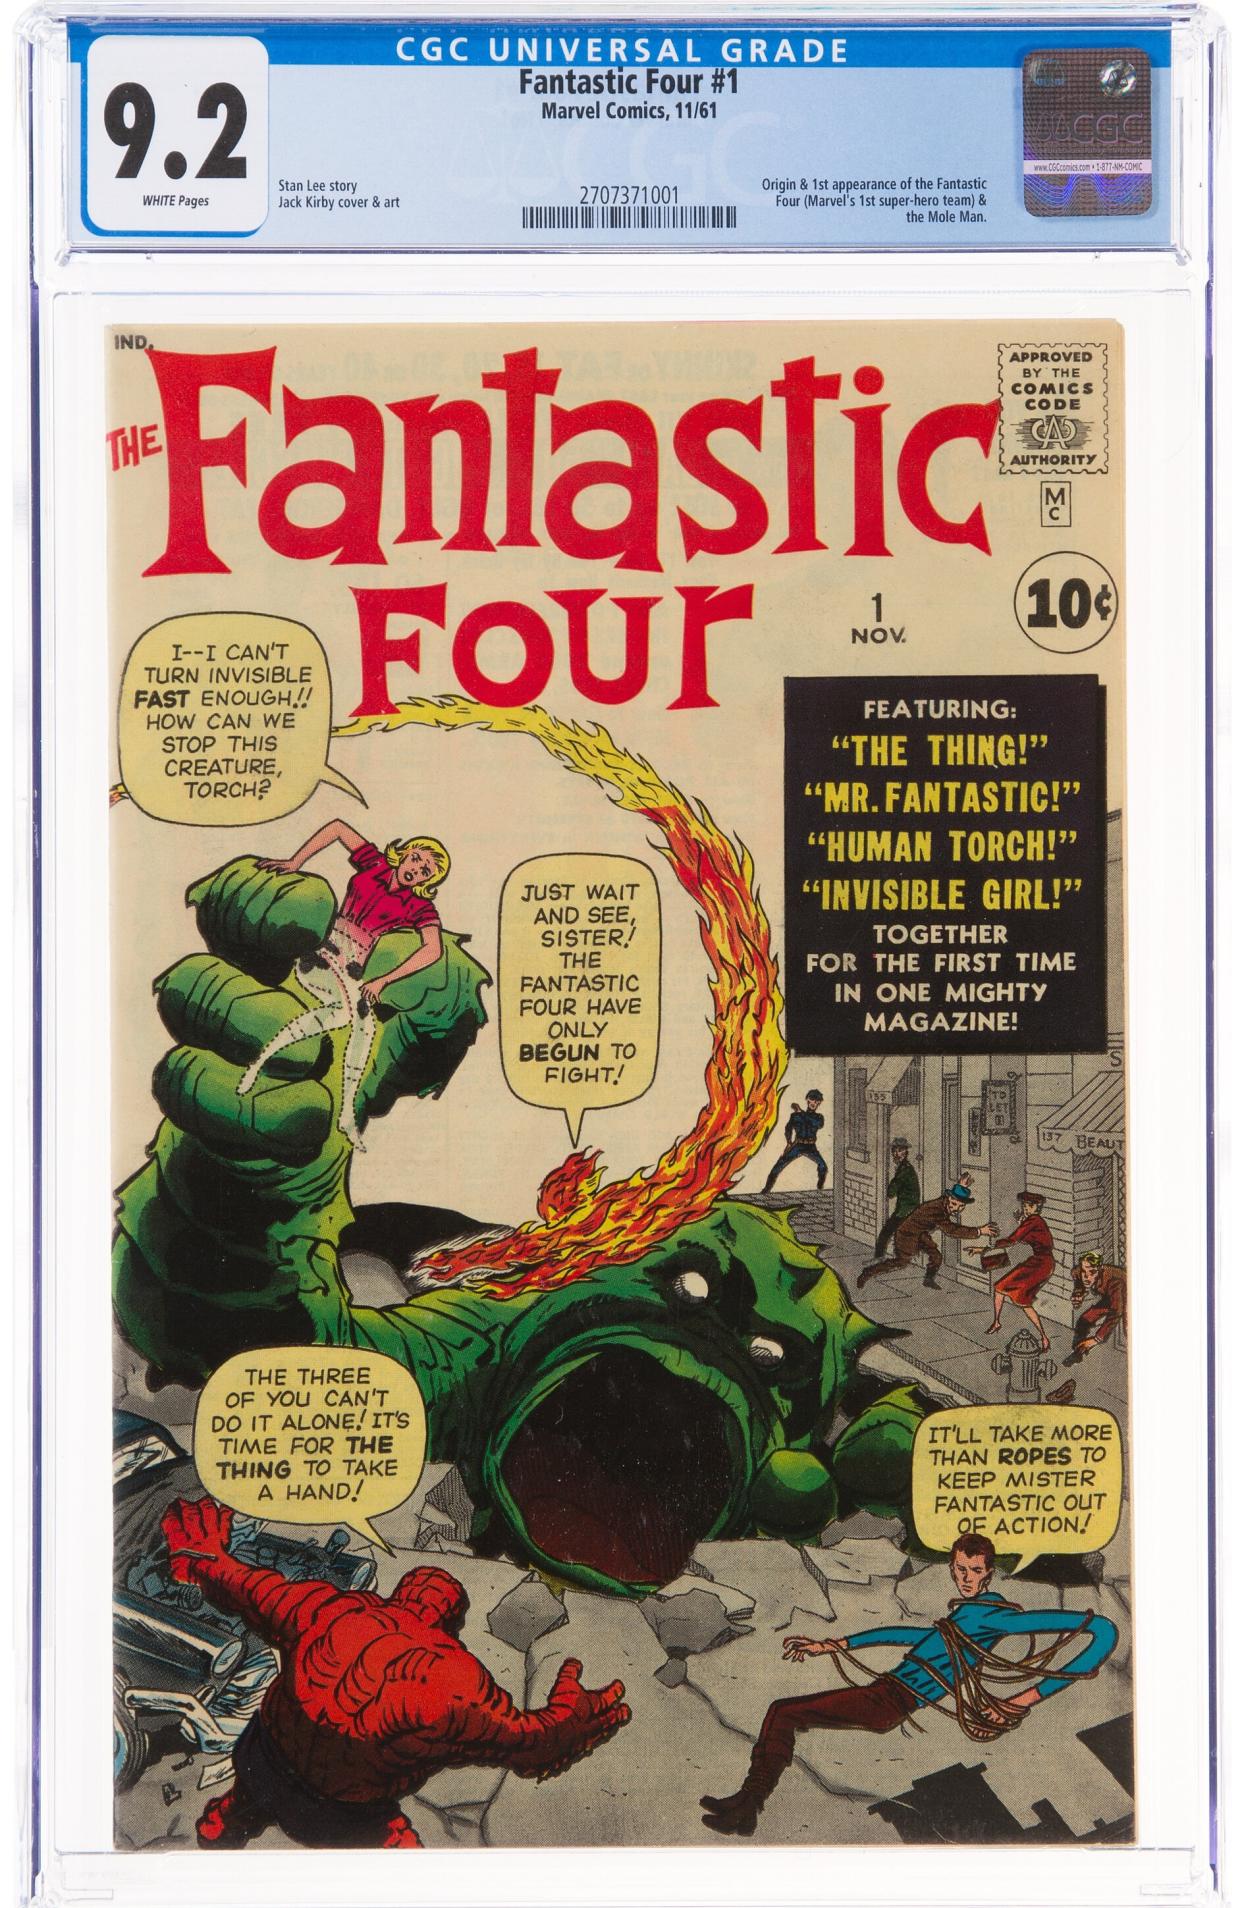 At the same auction a CGC NM-9.2 copy of the Fantastic Four’s 1961 debut sold for 1.5 million US dollars (£1.1 million) (Heritage Auctions/PA)